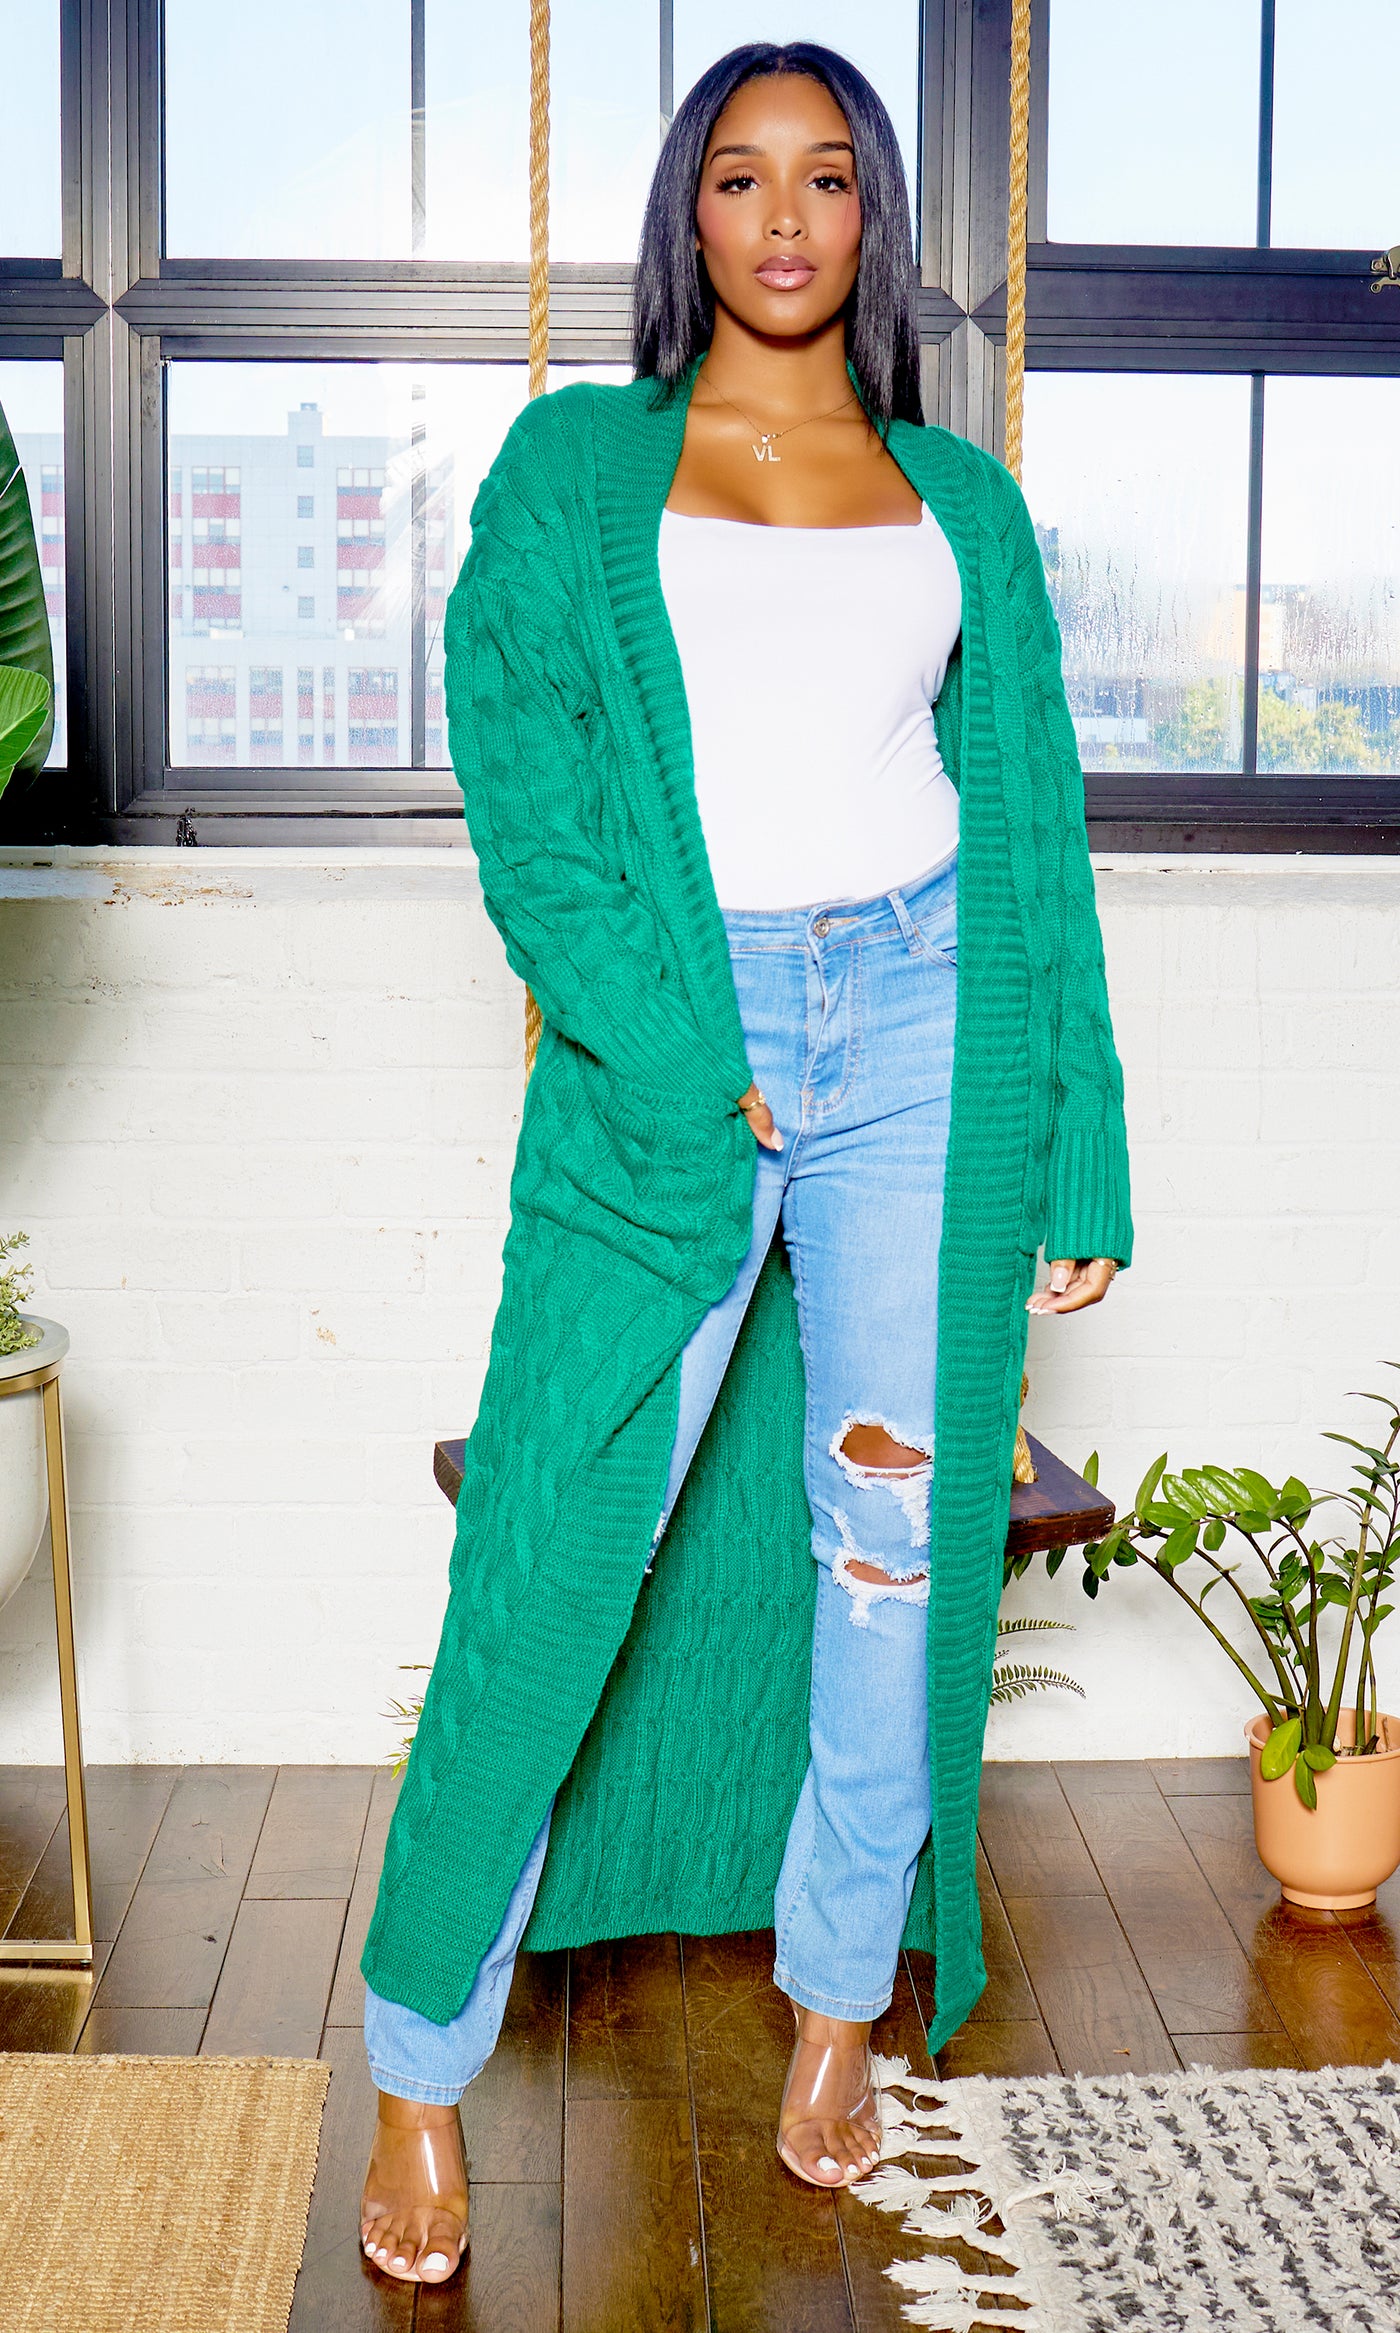 Cable Knit Cardigan - Green PREORDER Ships End September - Cutely Covered